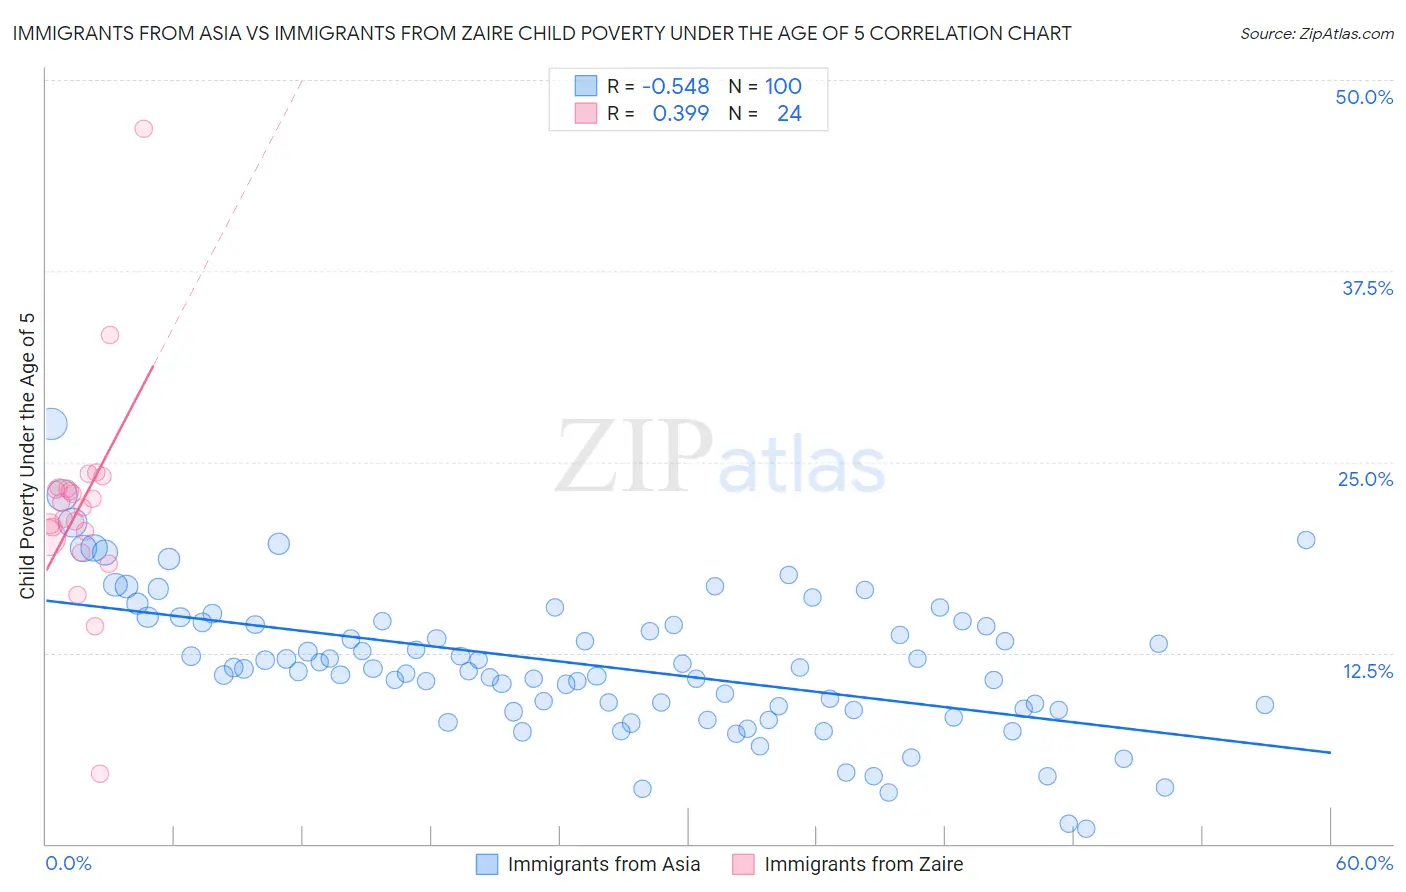 Immigrants from Asia vs Immigrants from Zaire Child Poverty Under the Age of 5